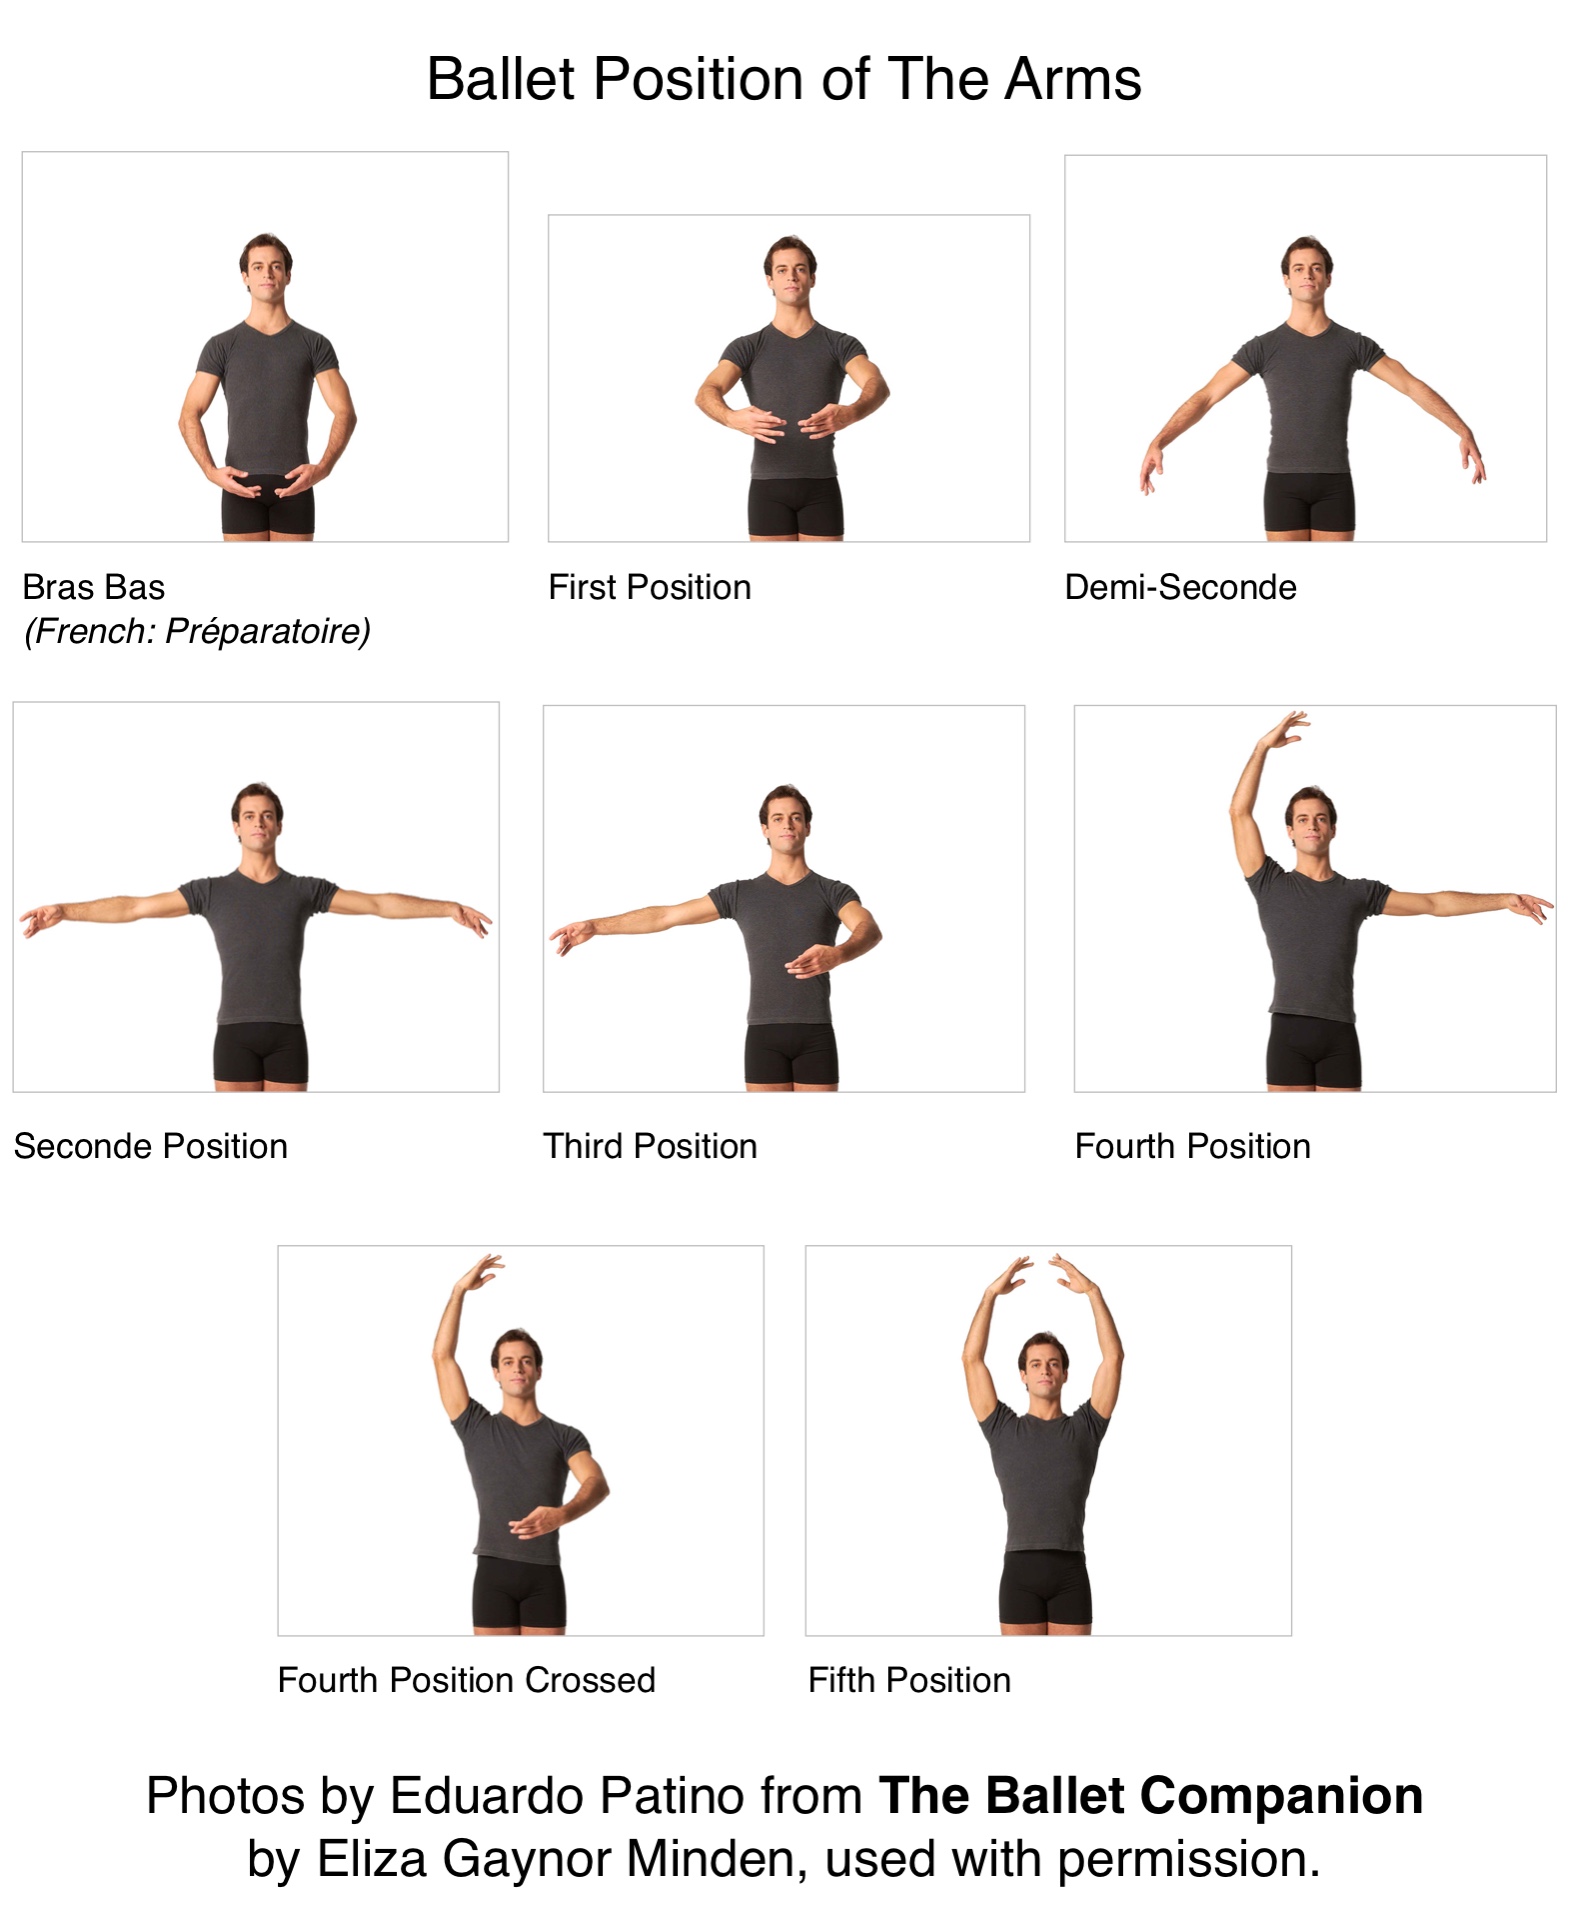 Ballet Position of The Arms